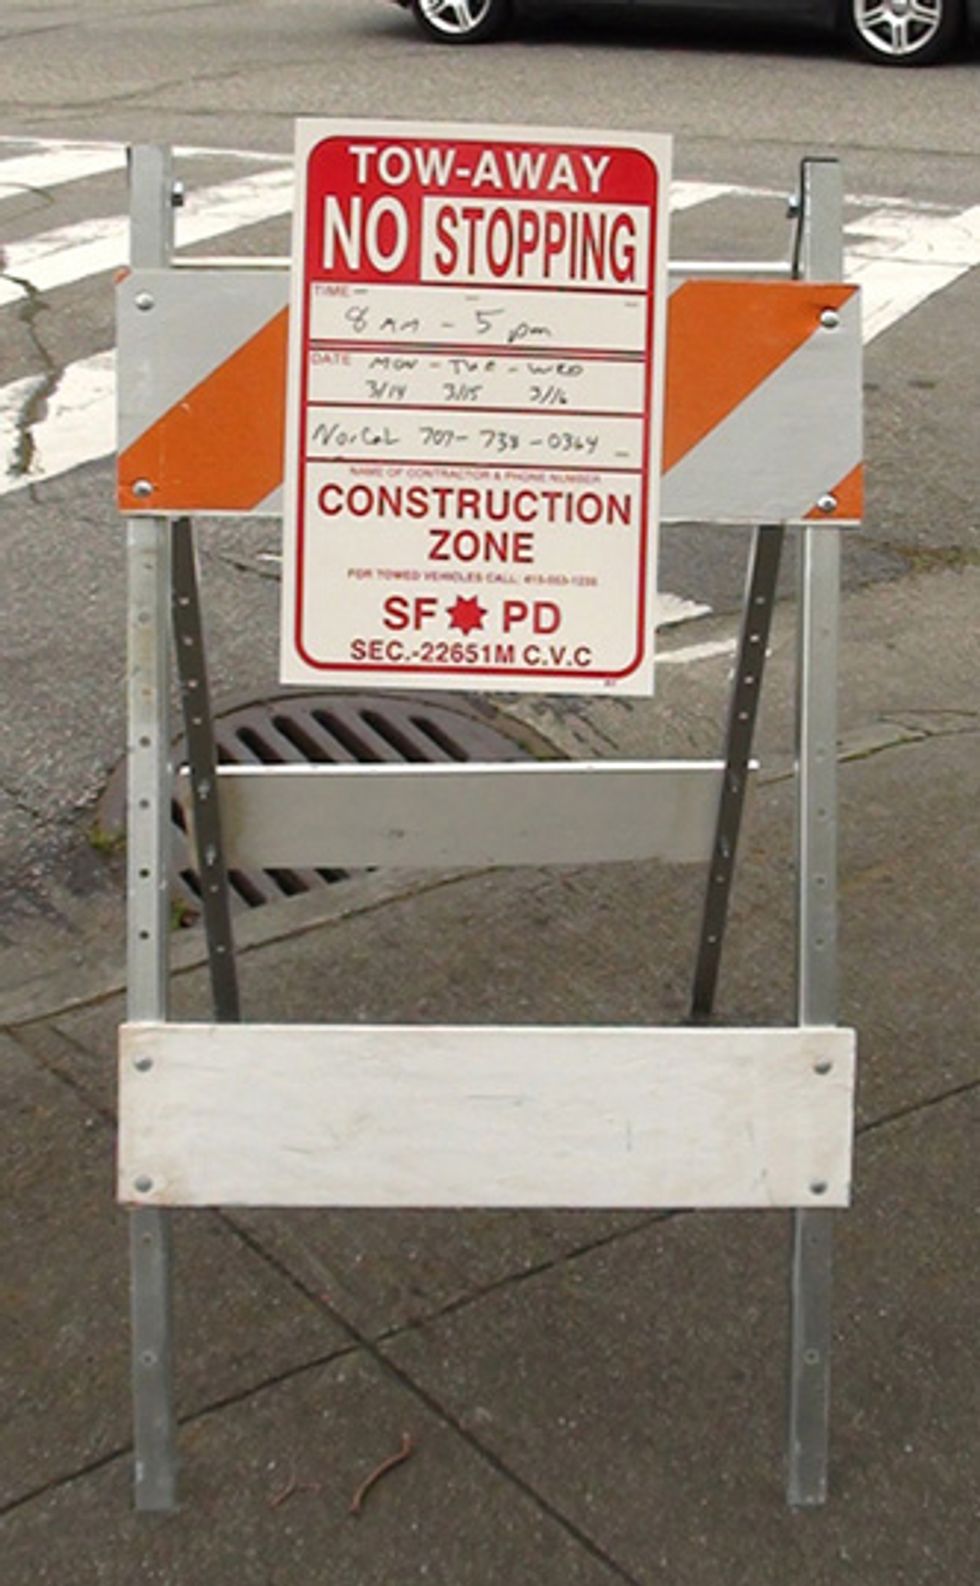 Parking Quiz: Confusing Construction Zone Signs